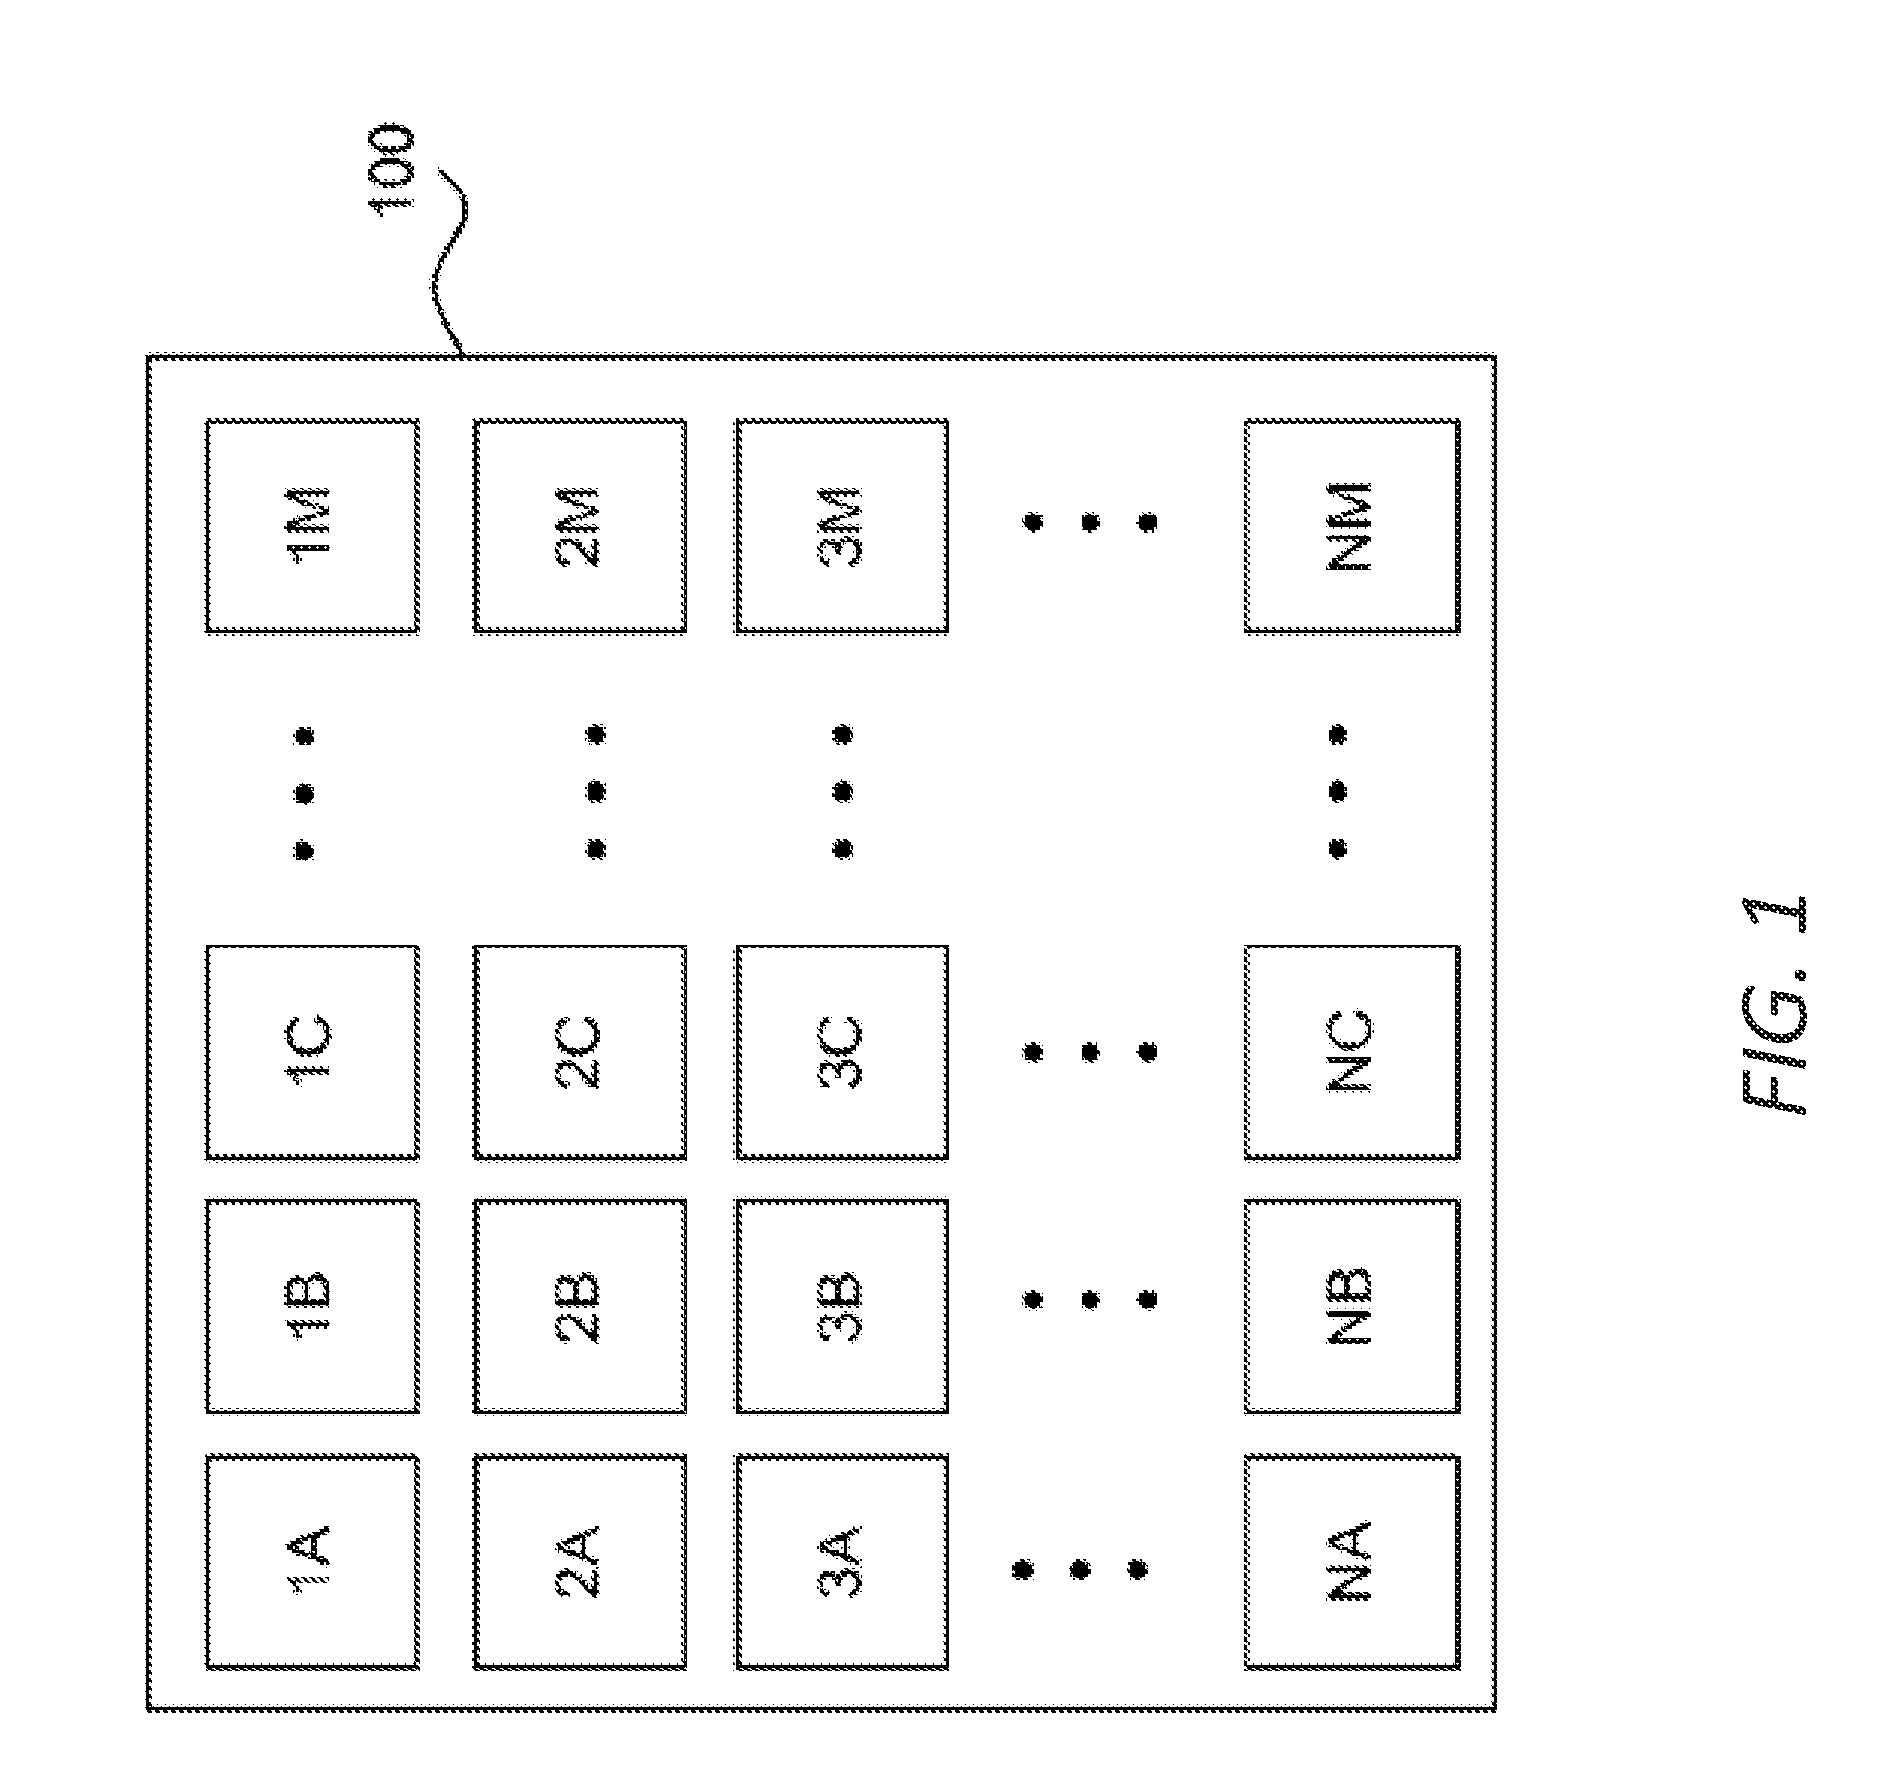 Optical arrangements for use with an array camera